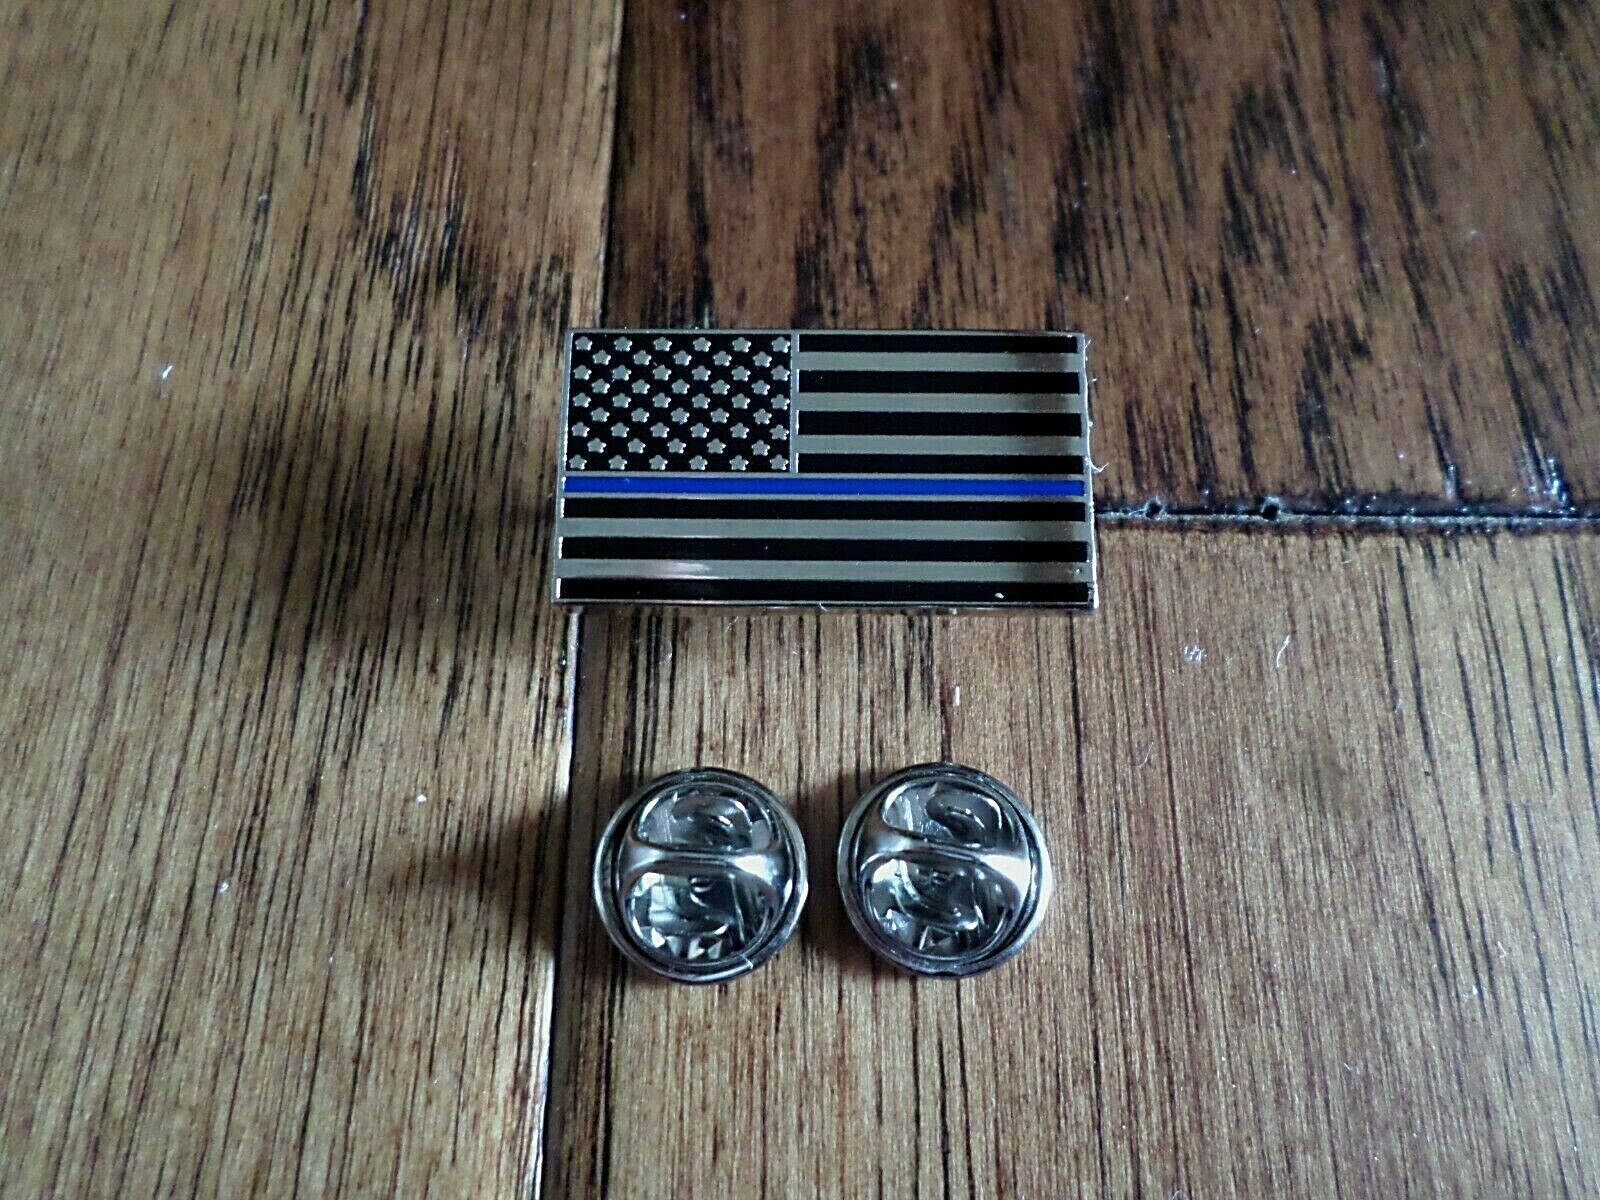 POLICE THIN BLUE LINE HAT LAPEL PIN BADGE POLICE SERVICE HAT OR LAPEL PIN 